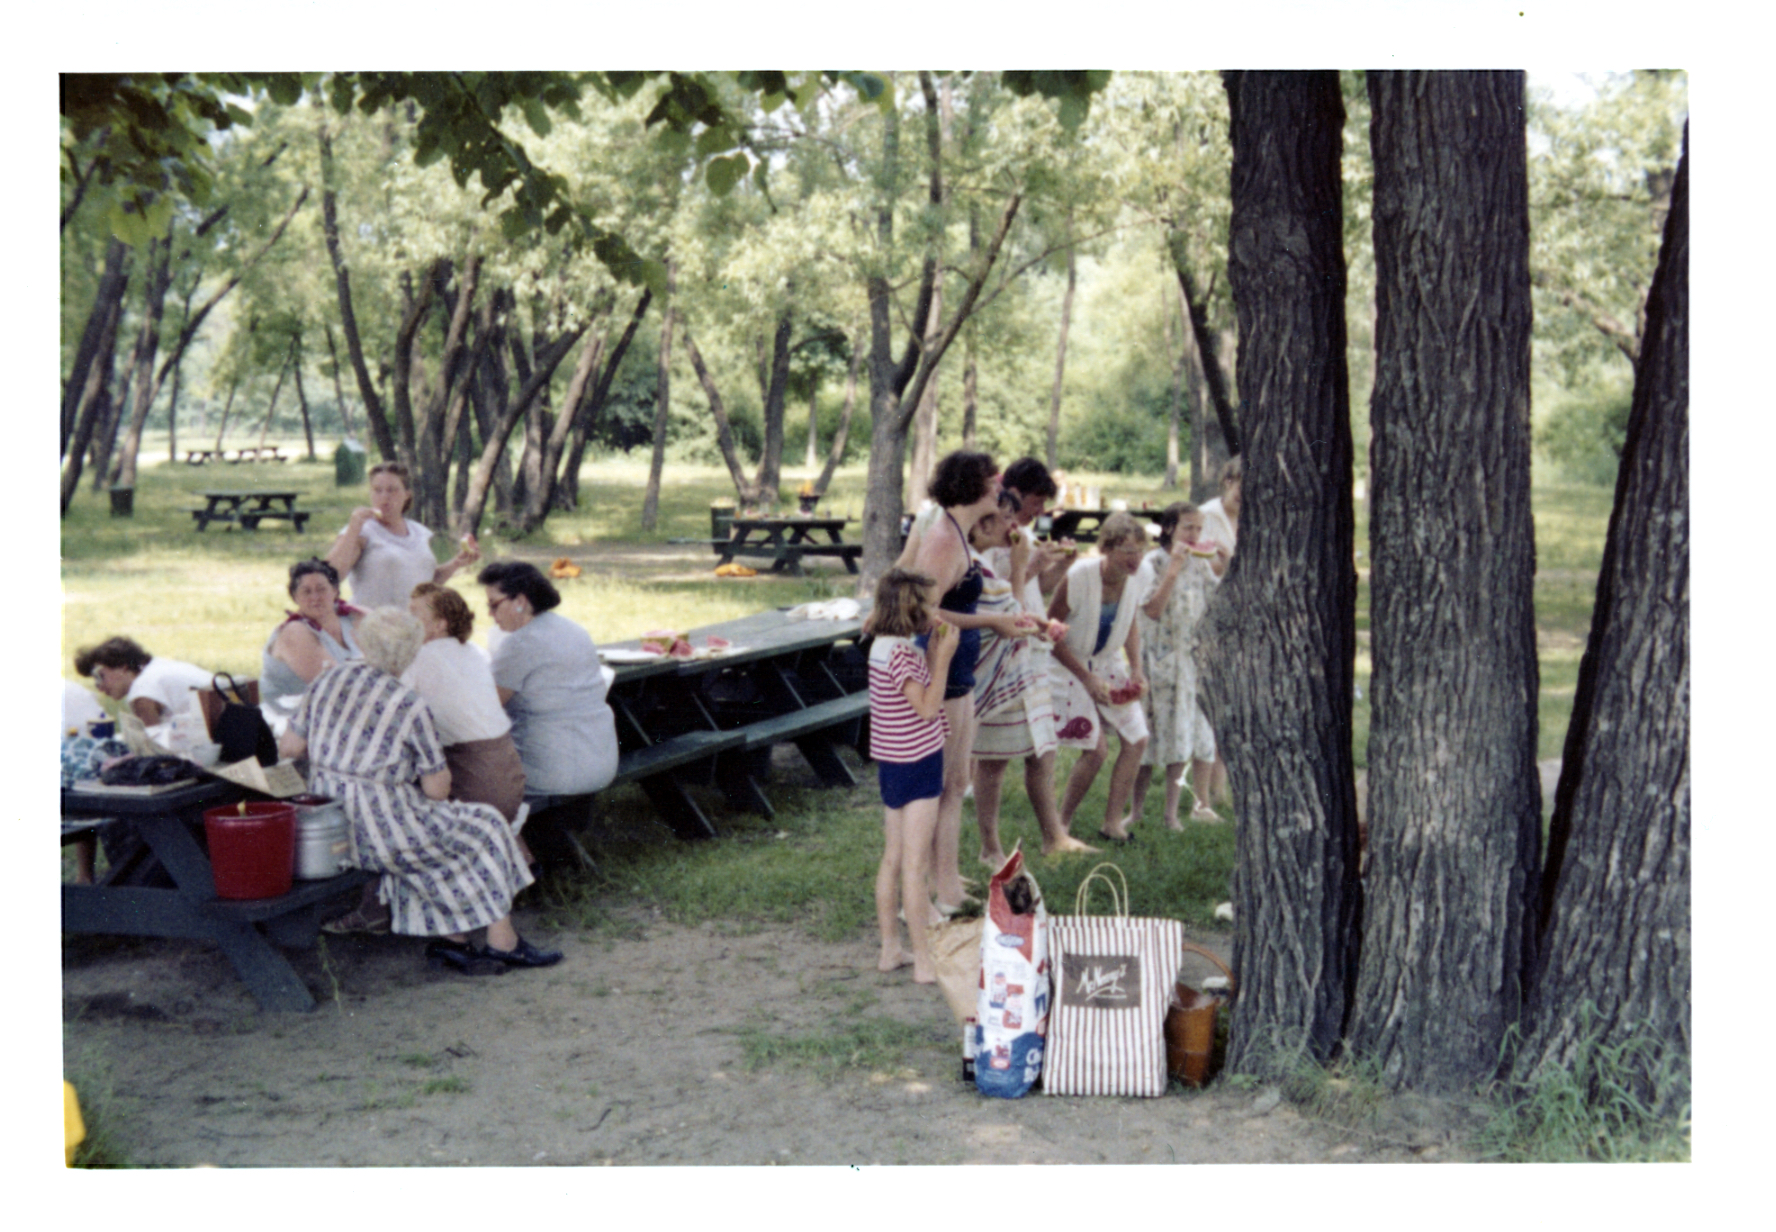 The girls are seen from the side. Some women are seated at a picnic
            table. More tables and trees are visible.